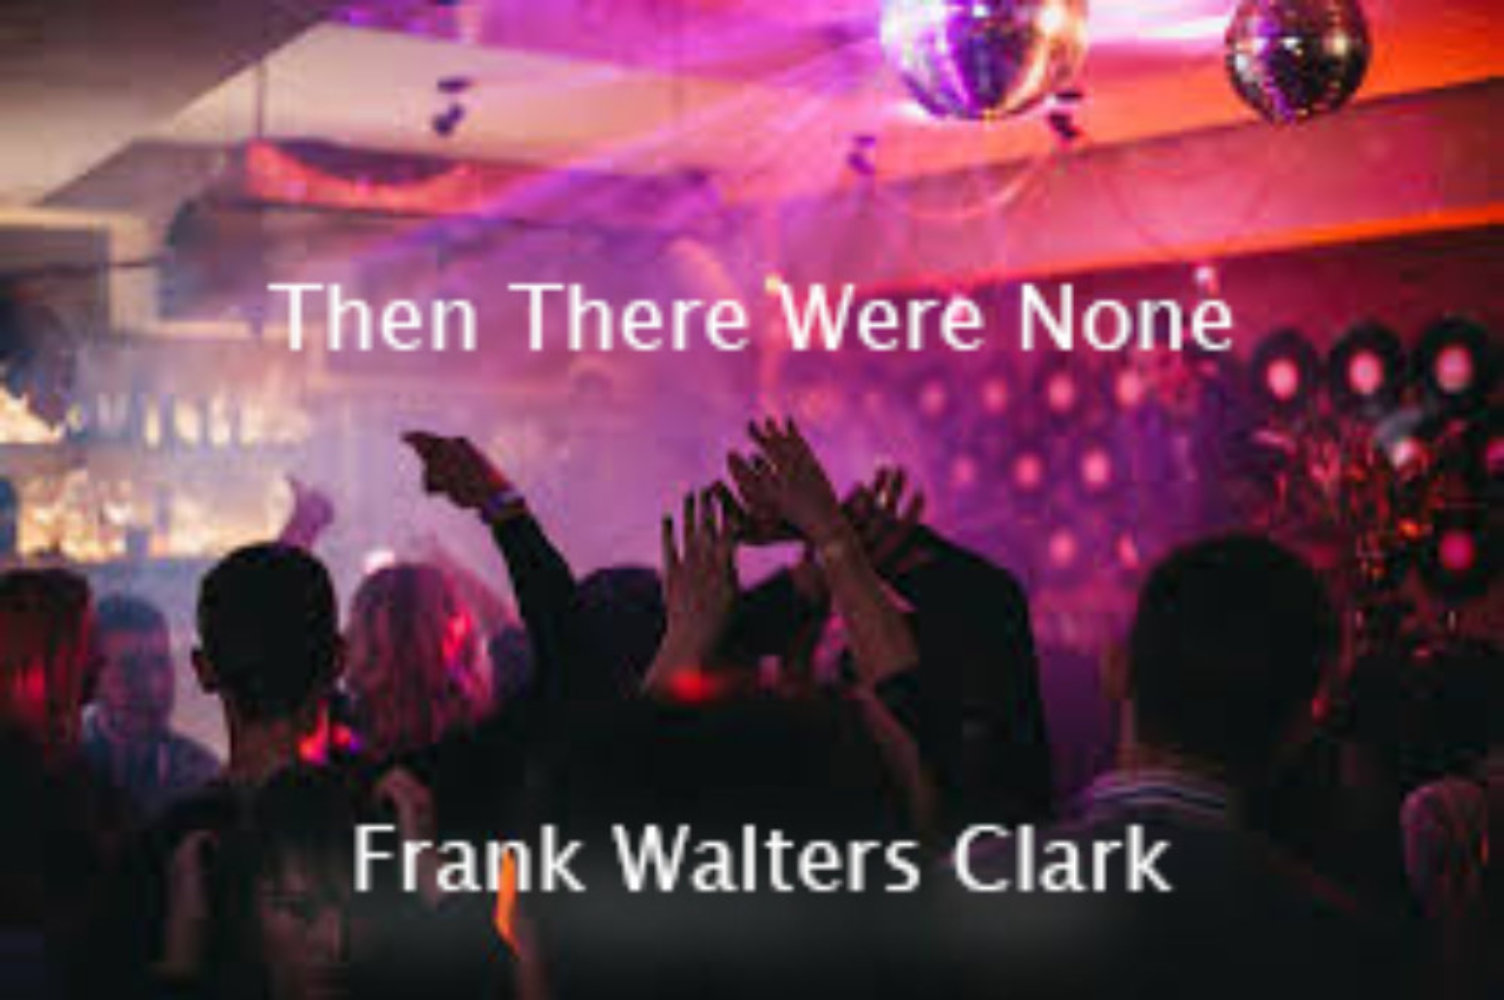 Then There Were None by Frank Walters Clark